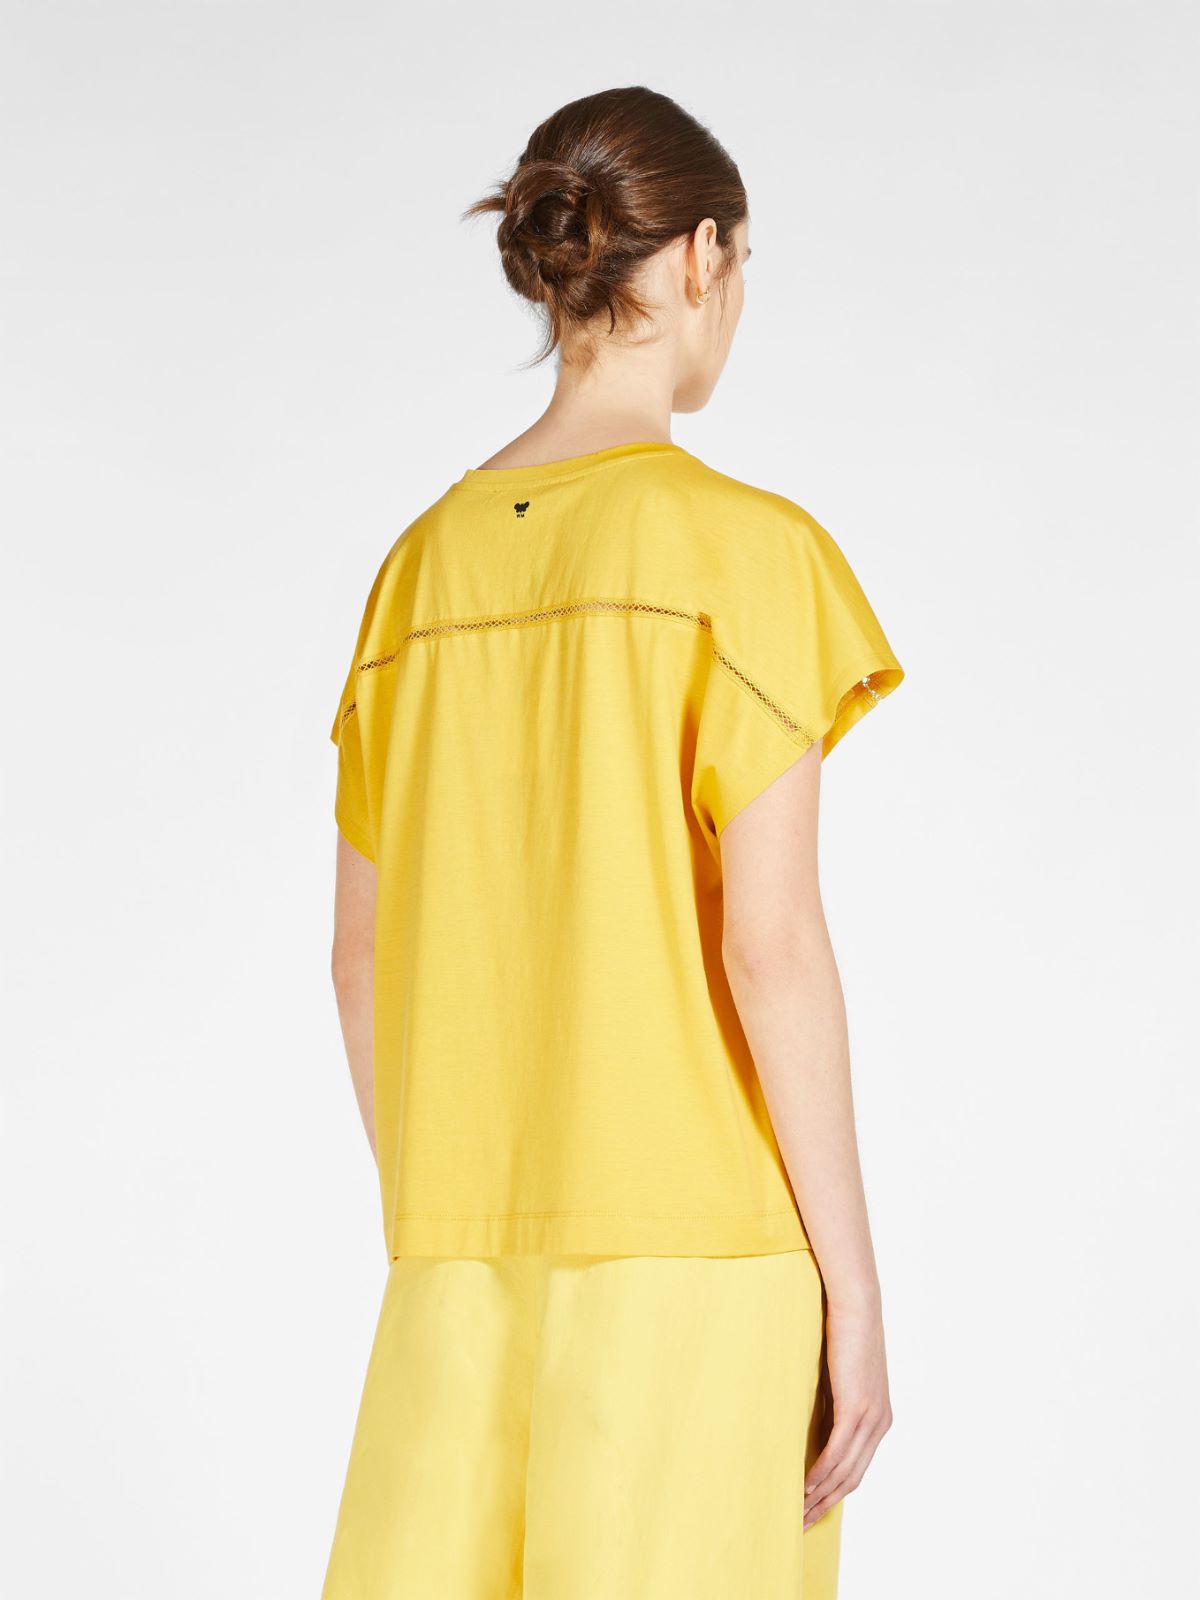 T-shirt in cotton jersey - BRIGHT YELLOW - Weekend Max Mara - 3